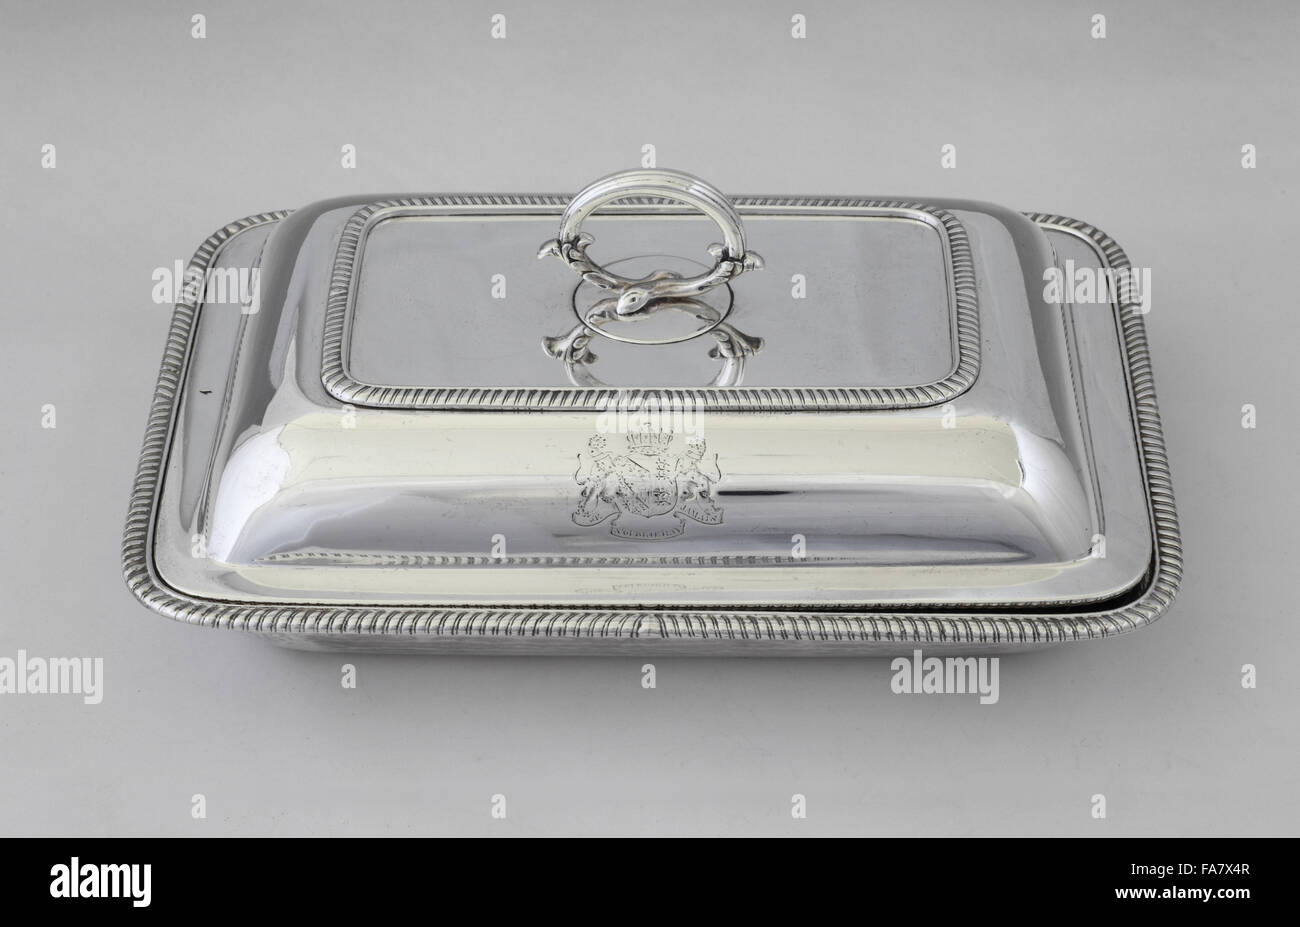 Entree dish, 1802, by Richard Cooke, part of the silver collection at Ickworth, Suffolk. National Trust inventory number: 852190 Stock Photo